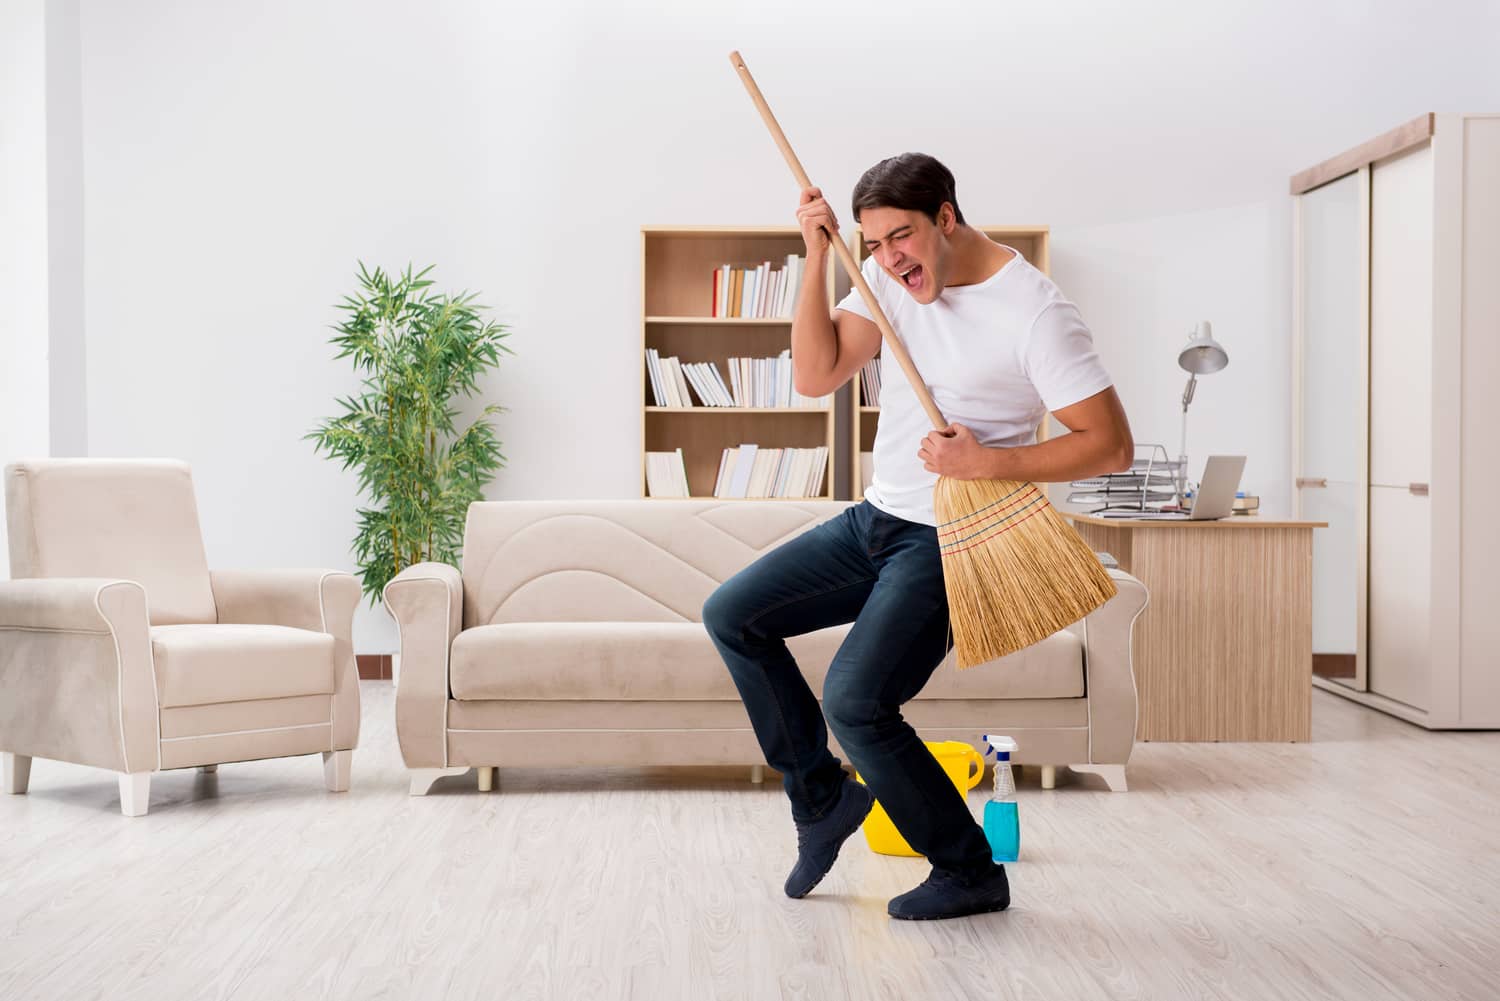 Can You Score Better Than 80% On This 24-Question English Quiz on Your First Try? Cleaning broom sweeping housework chores